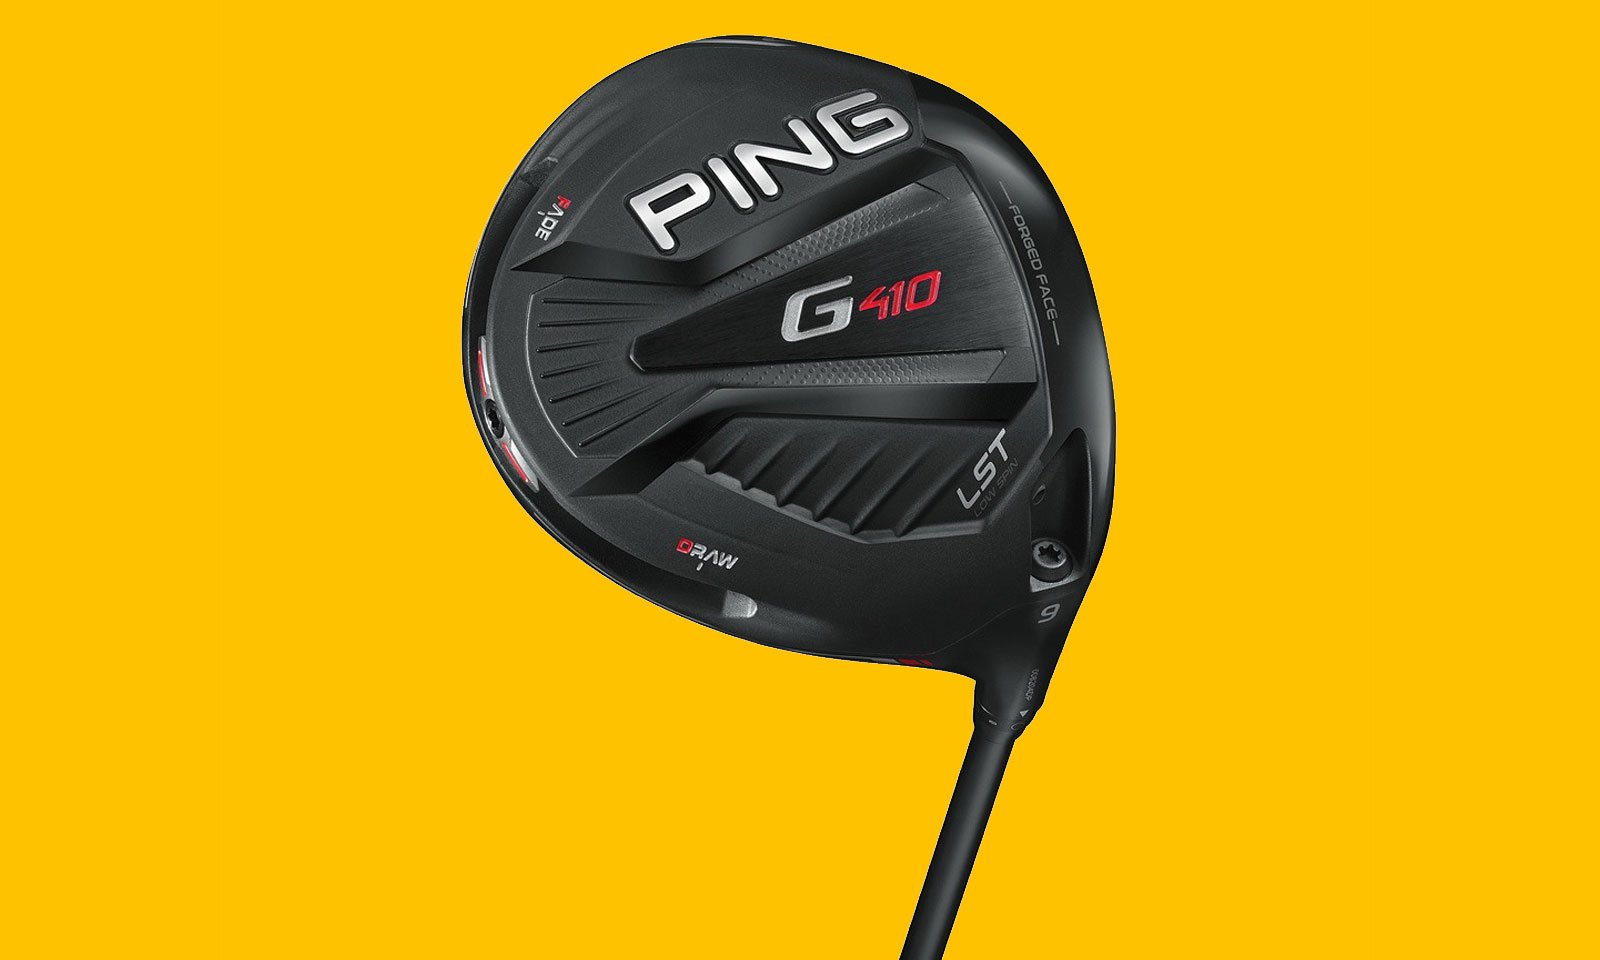 Ping golf driver